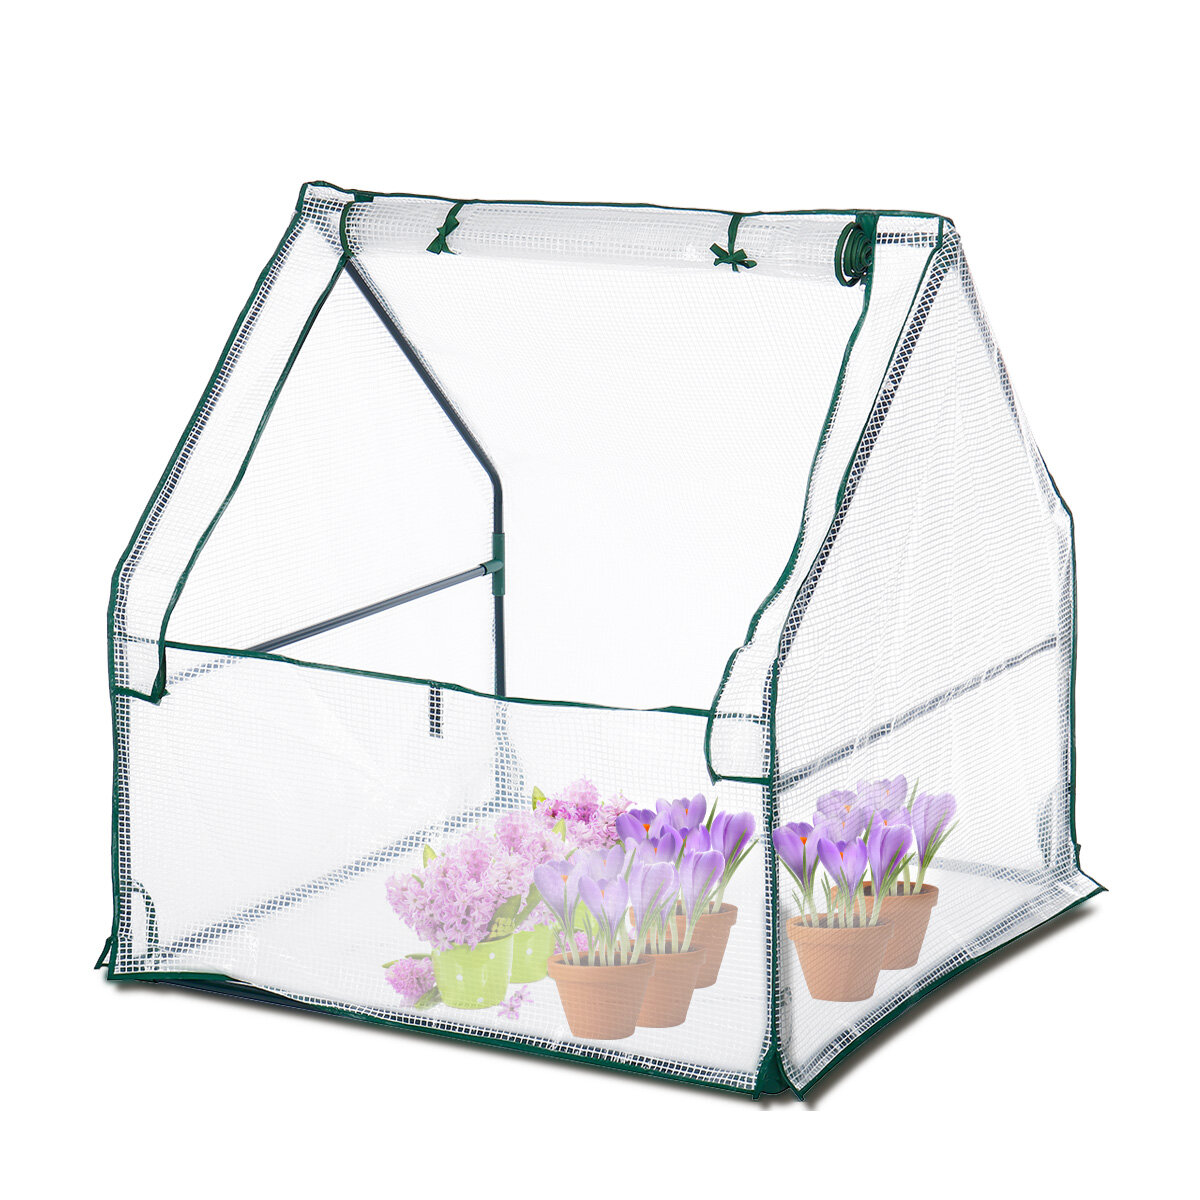 

90x90x92cm Greenhouse Flower Garden Shed Plants Green House Outdoor Camping with Frame and PVC Cover